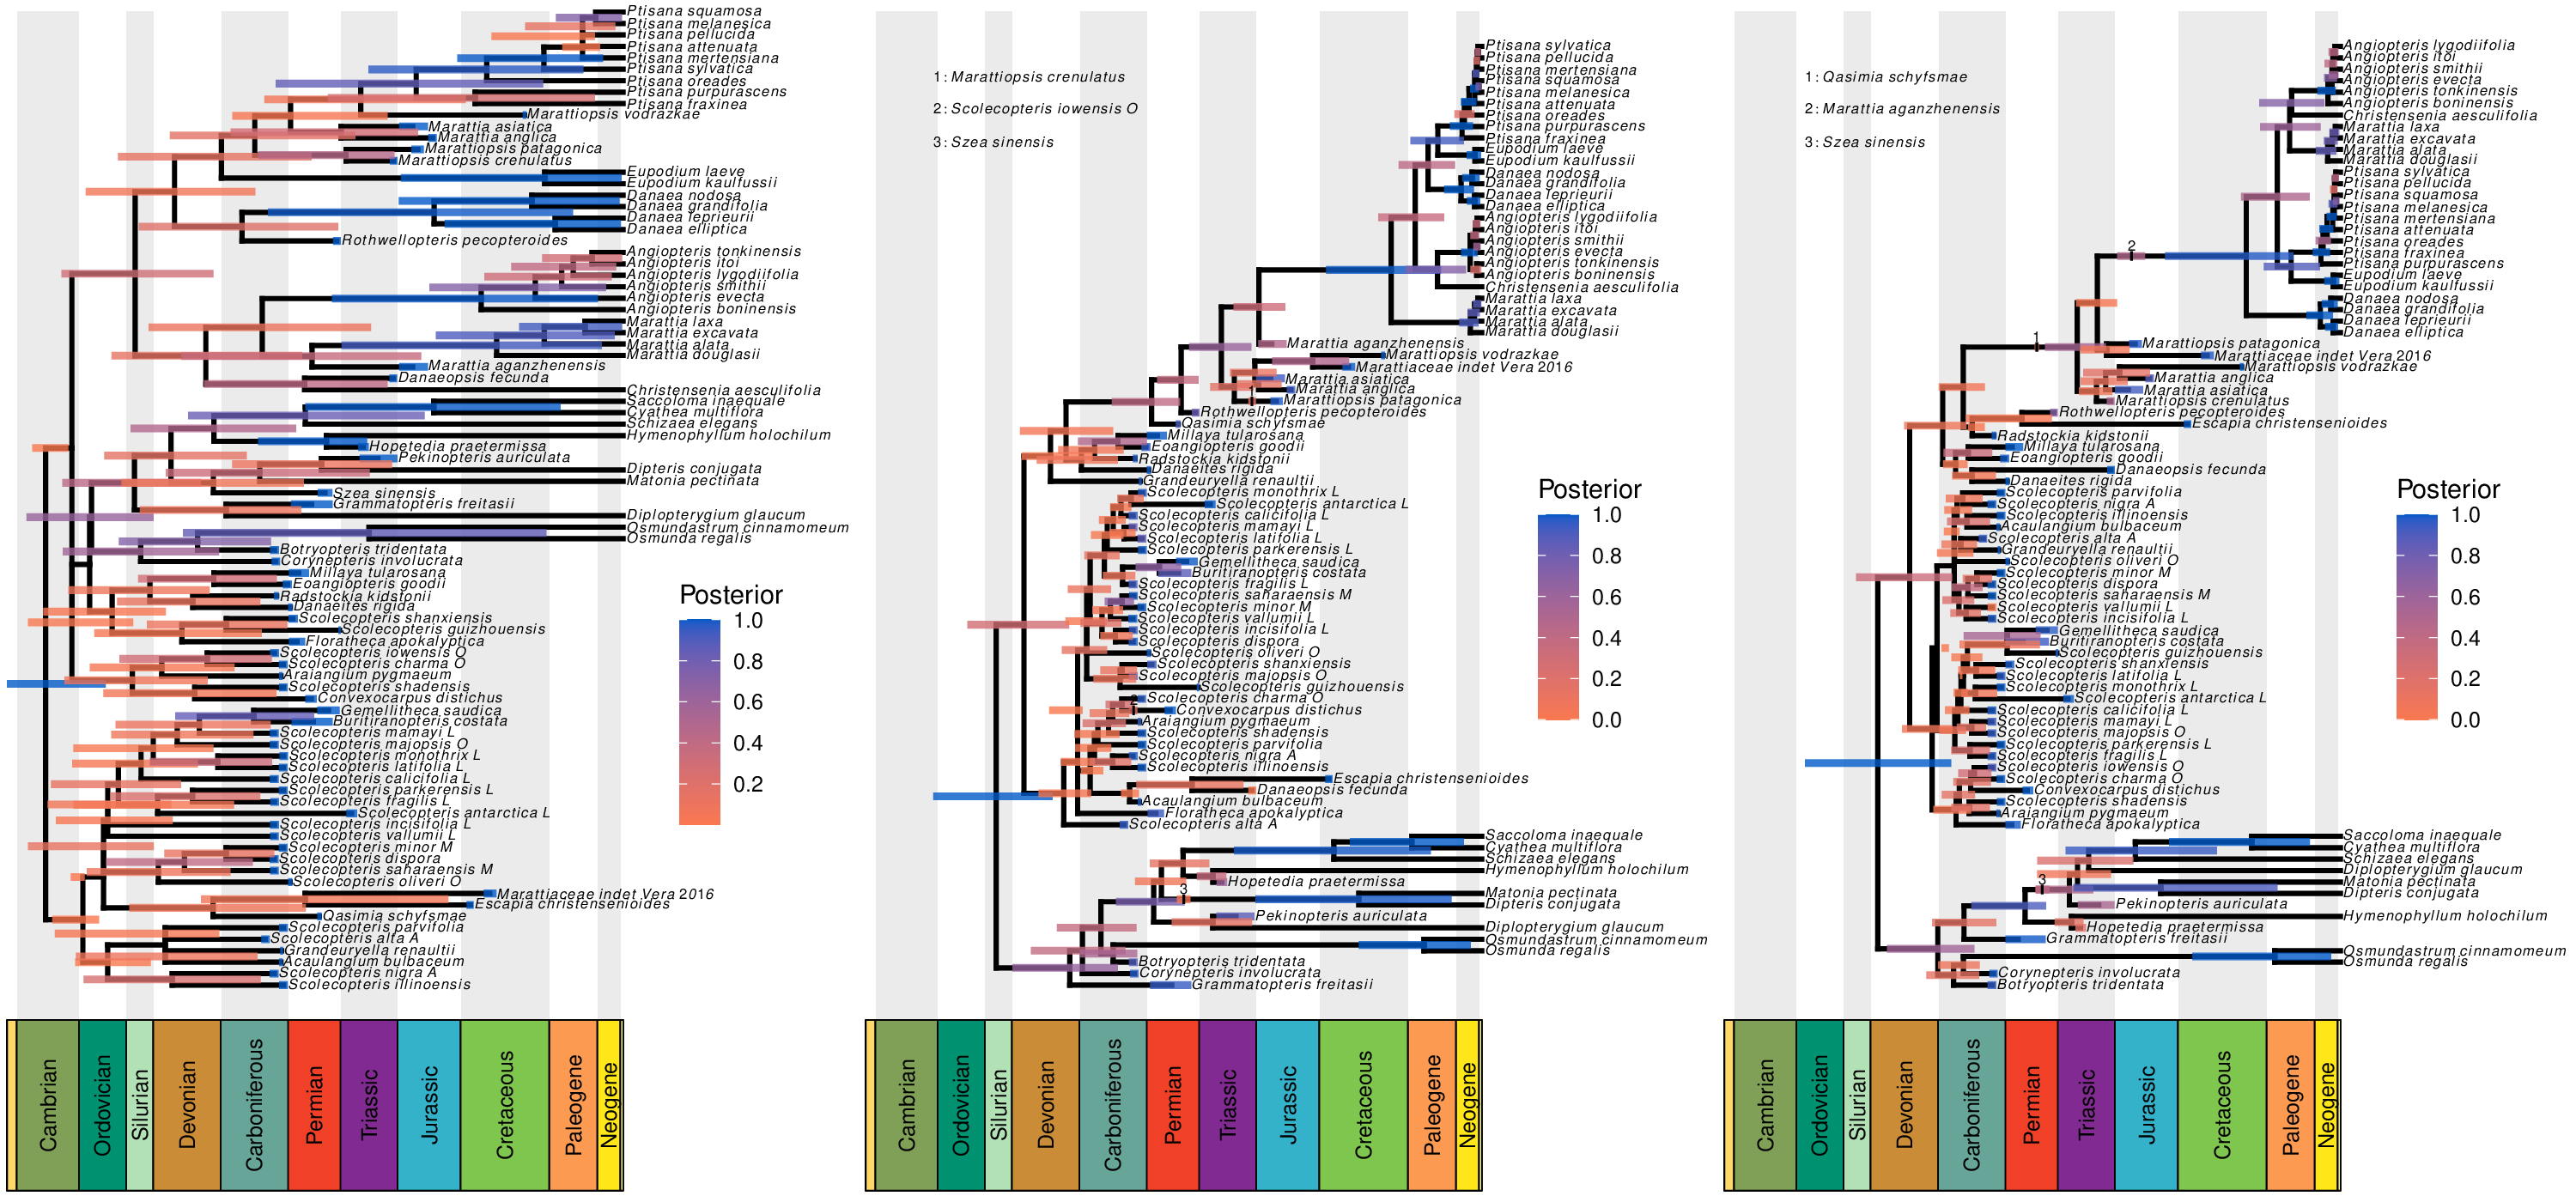 Marattialean phylogeny under different tree models: a uniform model (left), a fossilized birth-death model with constant speciation, extinction, and fossilization rates (middle), and a birth-death process where the speciation and extinction rates vary over time (right). From May et al. 2021 <u>Syst. Biol.</u>